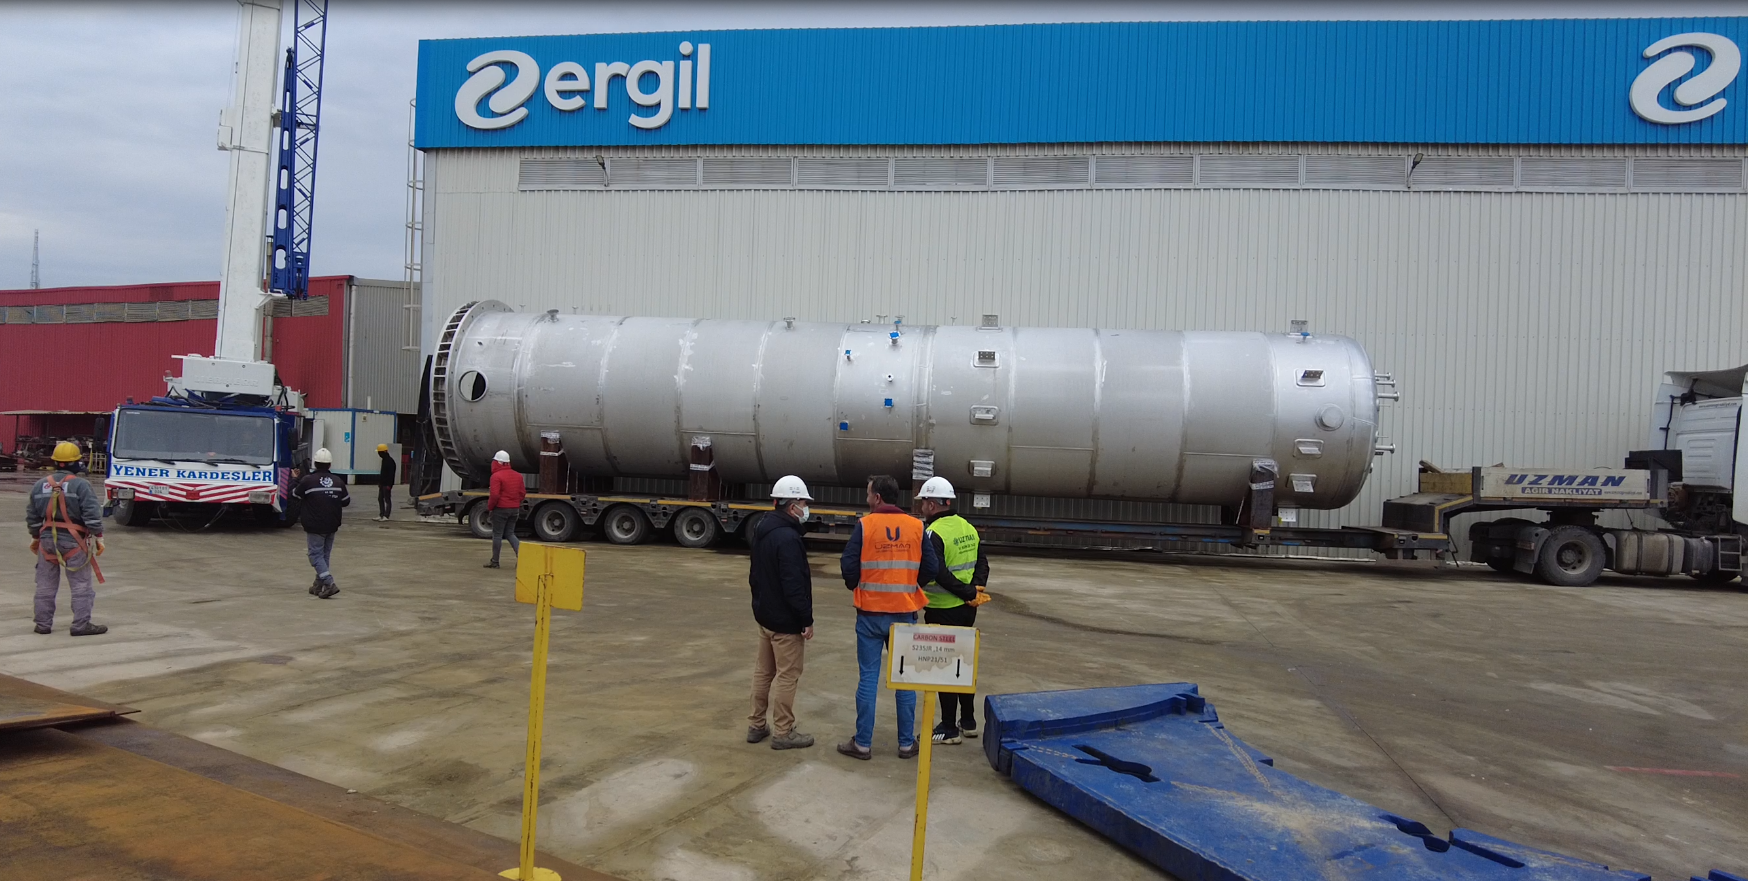 ERGIL is proud to announce the successful completion of our Distilled Nitrile & Crude Nitrile Vessel project 20